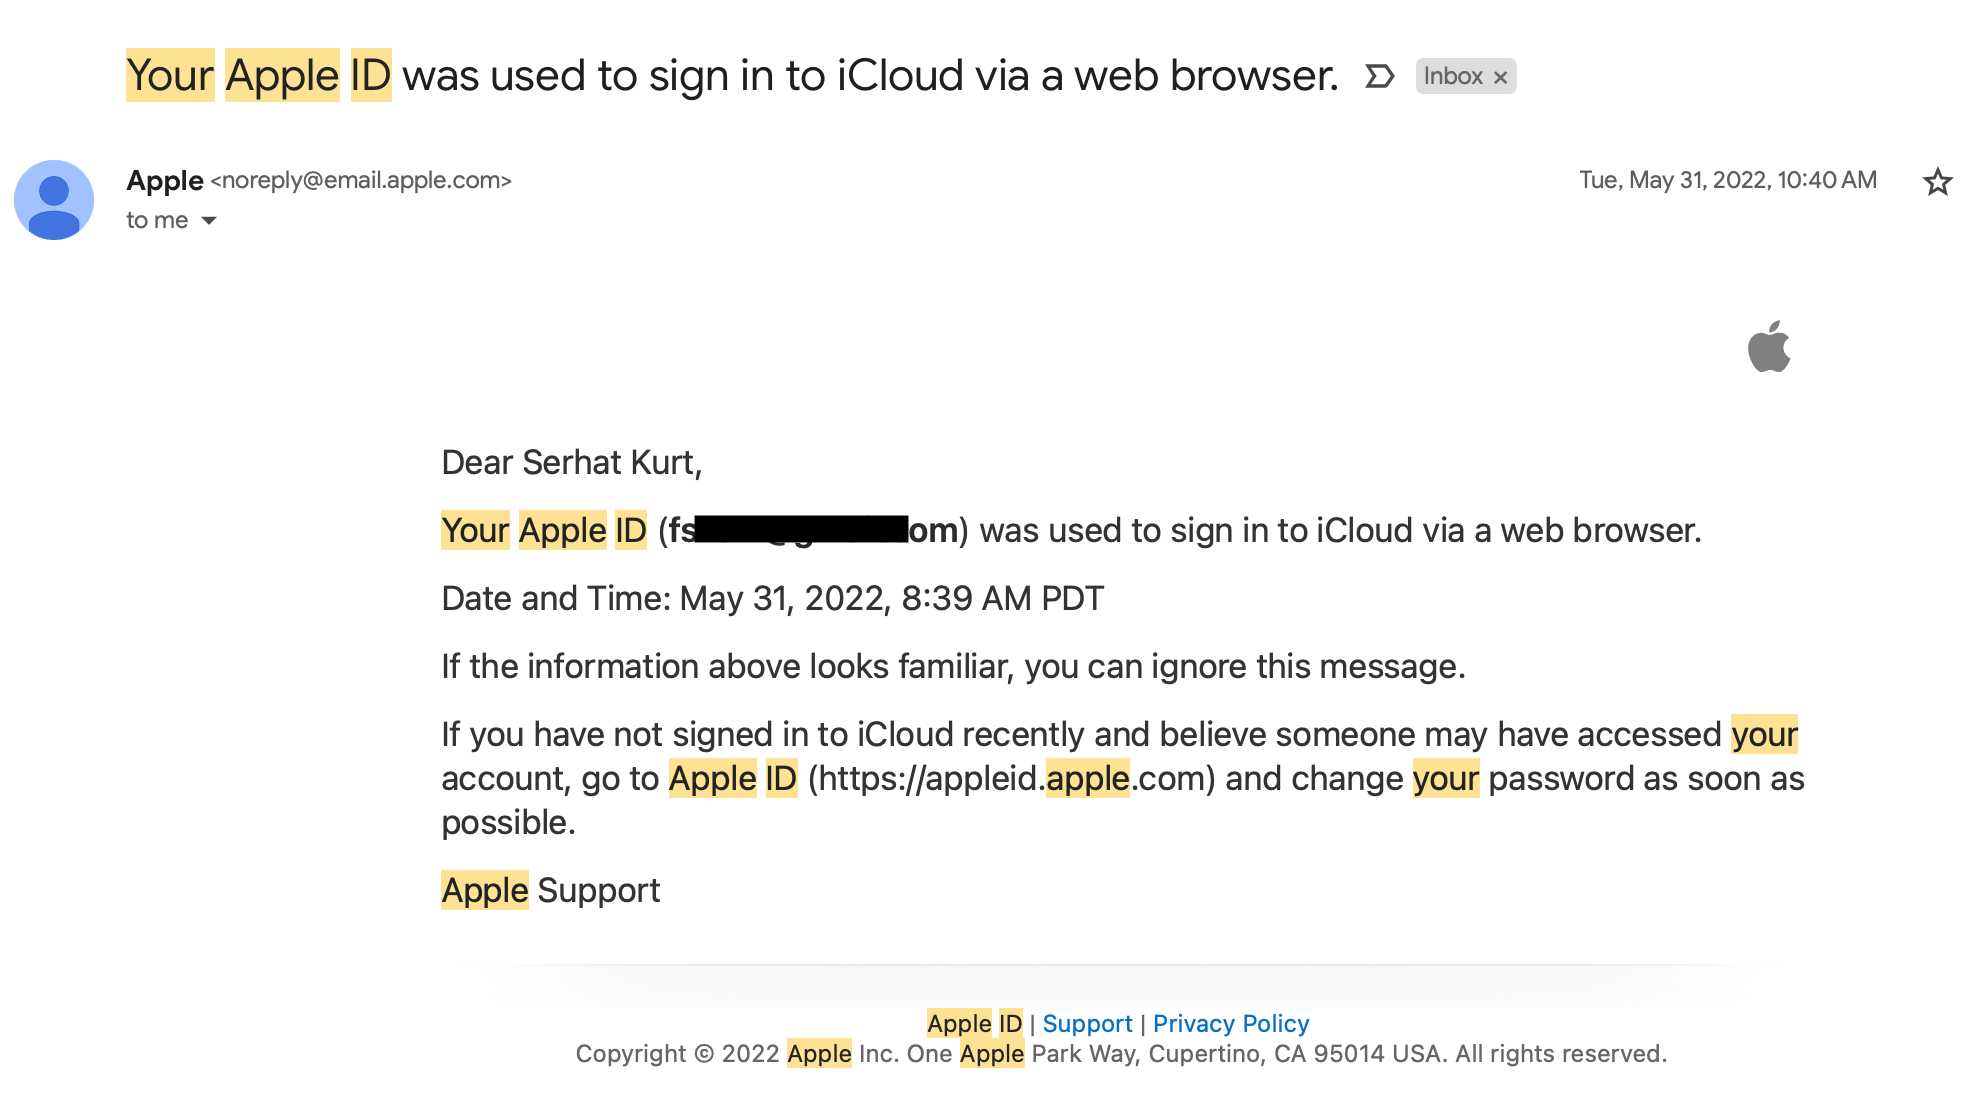 An Apple email showing the Apple ID